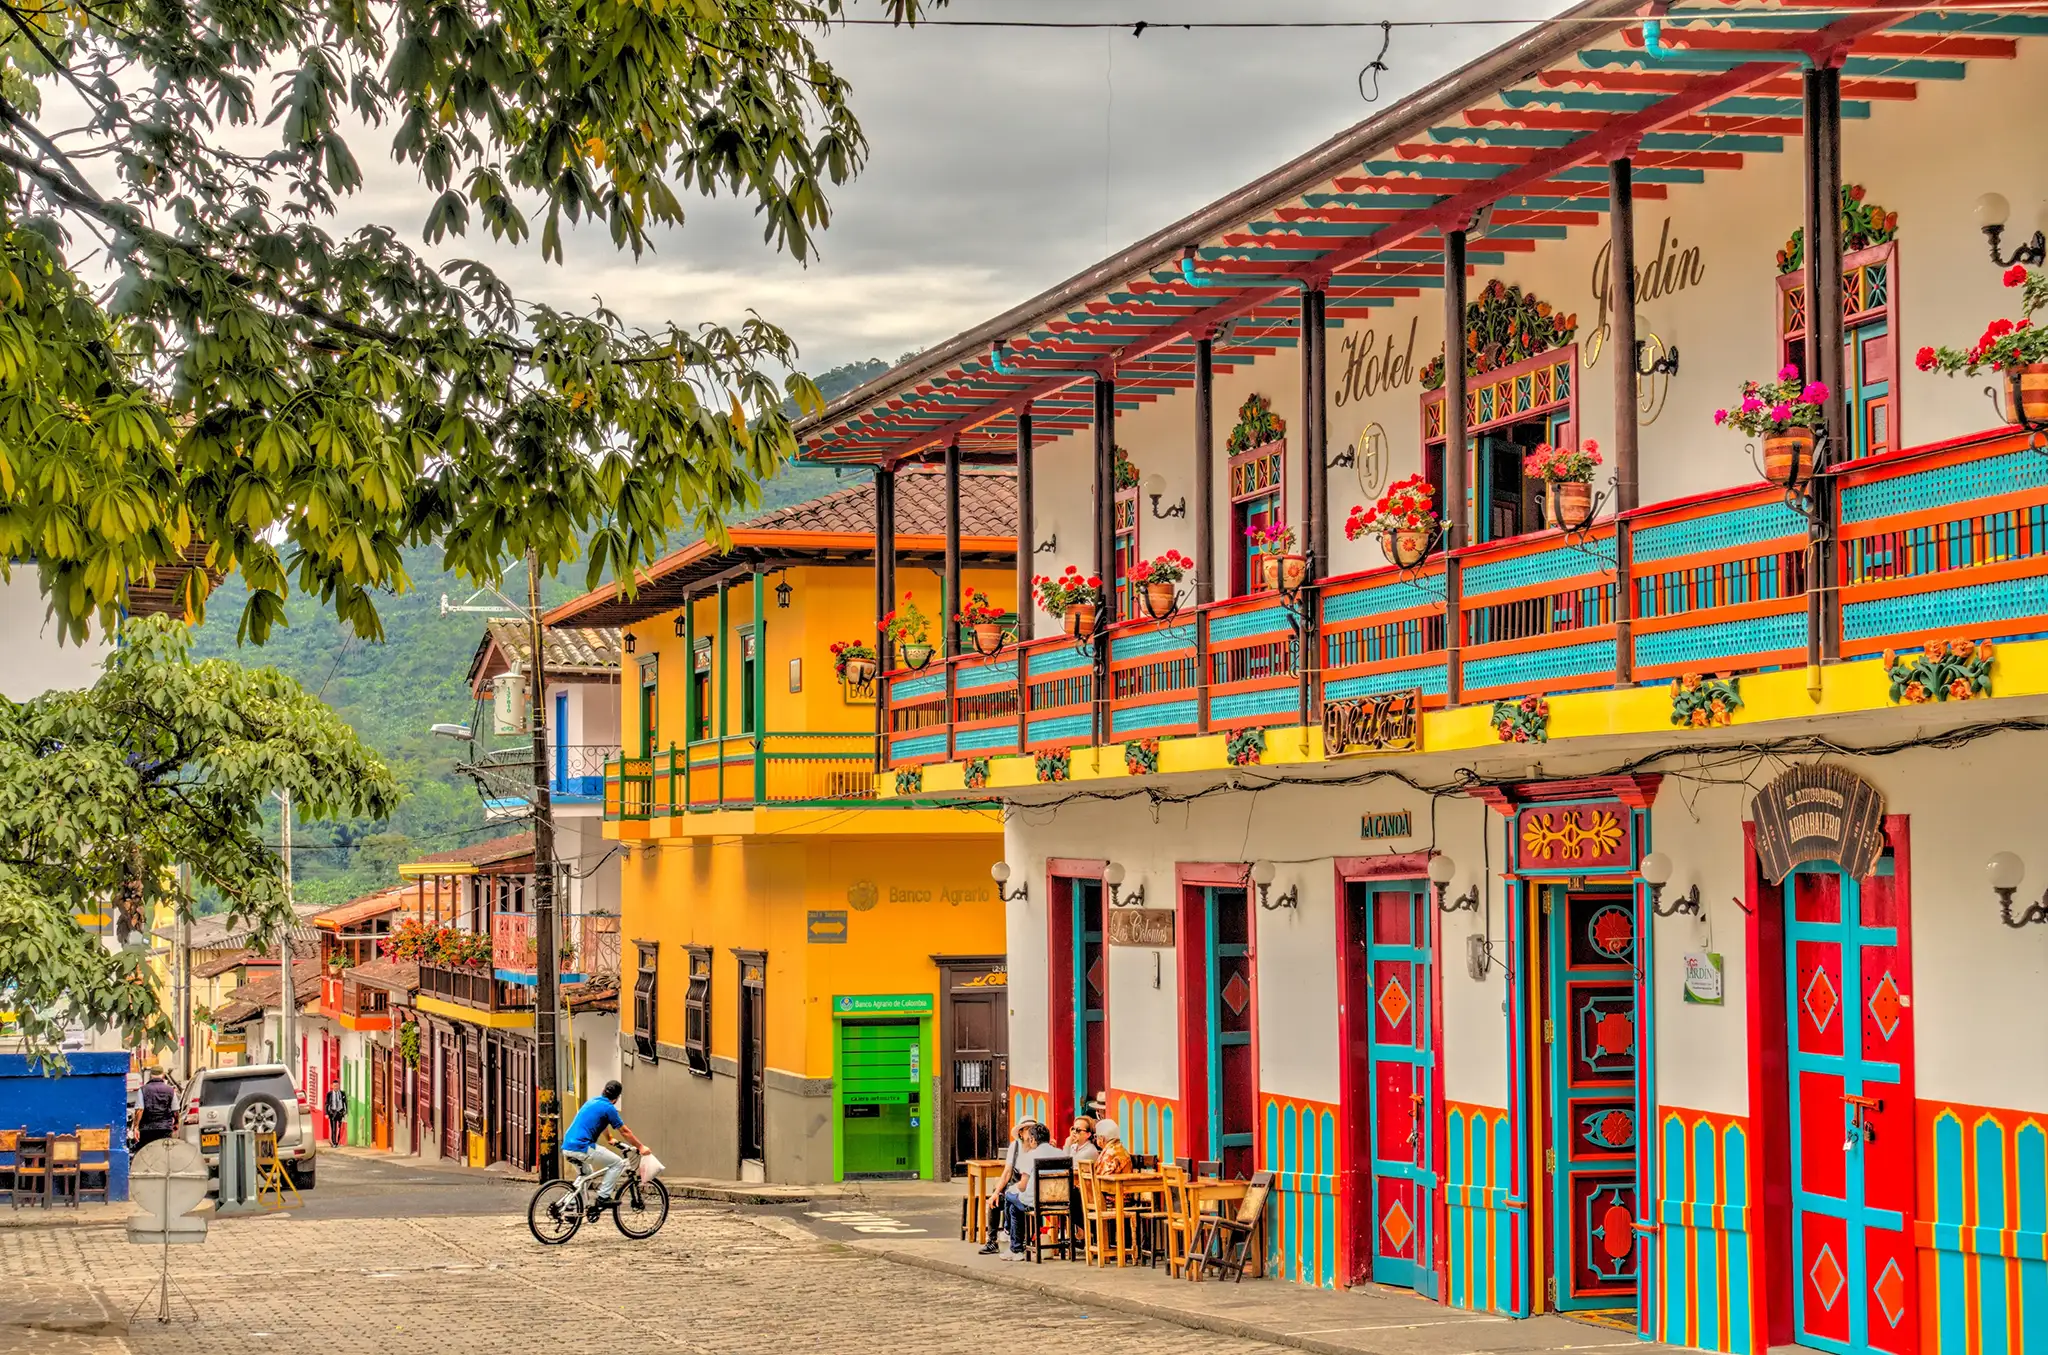 Jardin, picturesque town in Antioquia, Colombia.